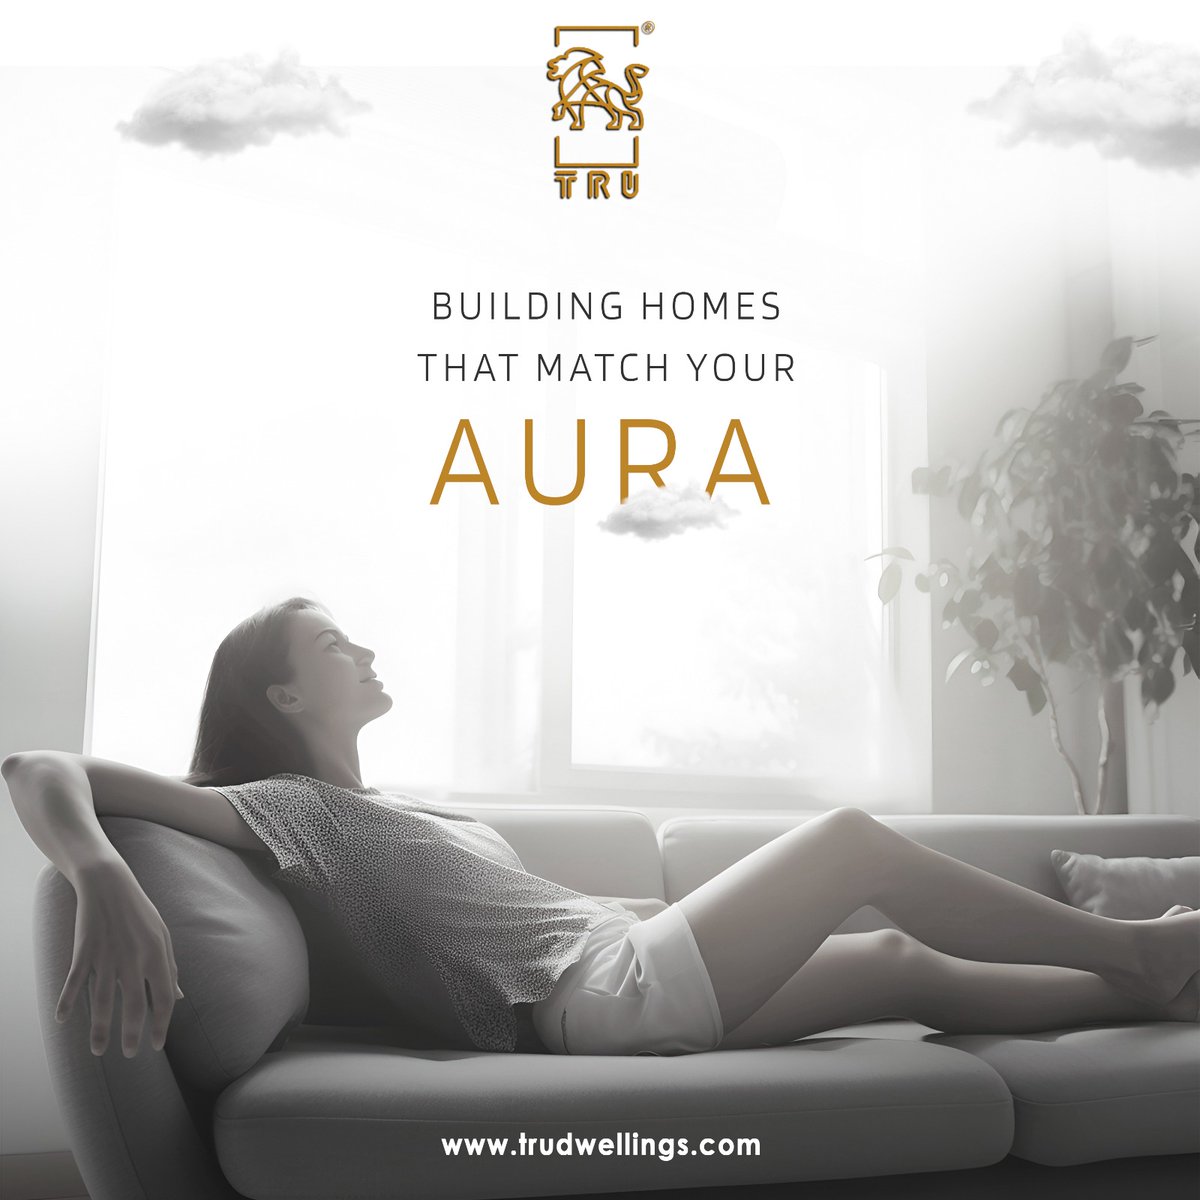 Crafting homes that resonate with your unique energy at Tru Dwellings.
.
.
.
.
#homedesign #dreamhomes #uniquehomes #homeinspiration #homestyle #homedecor #dreamhouse #customhomes #homedesigner #homegoals #interiordesign #housegoals #modernhomes #dreamhome #luxuryhomes #home